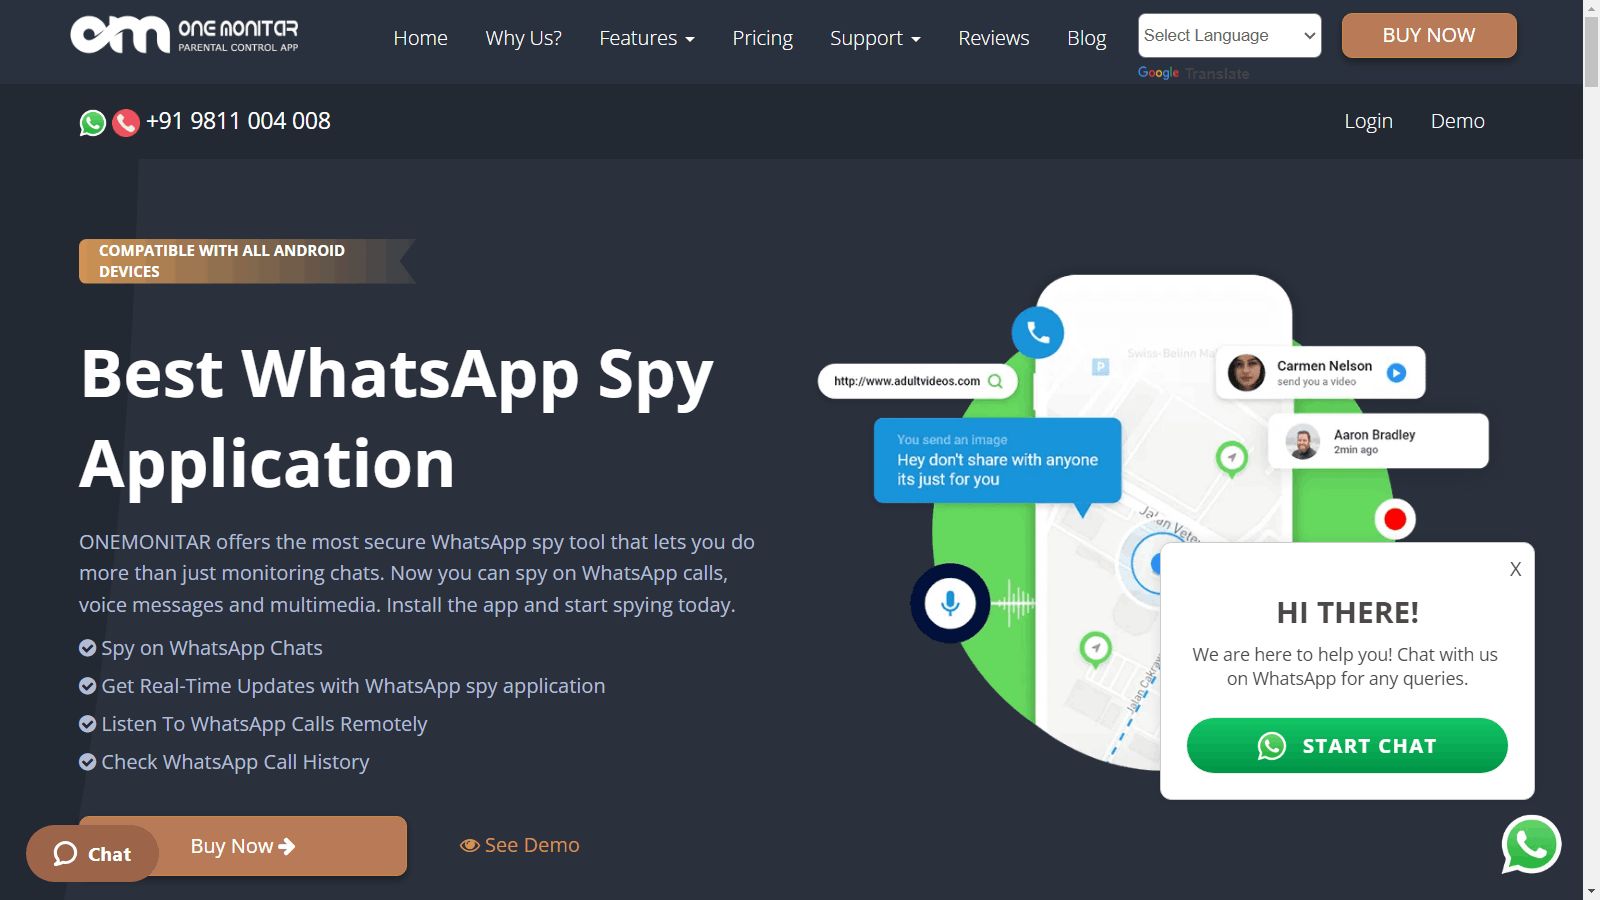 Secure Your Business with ONEMONITAR WhatsApp Spy App!